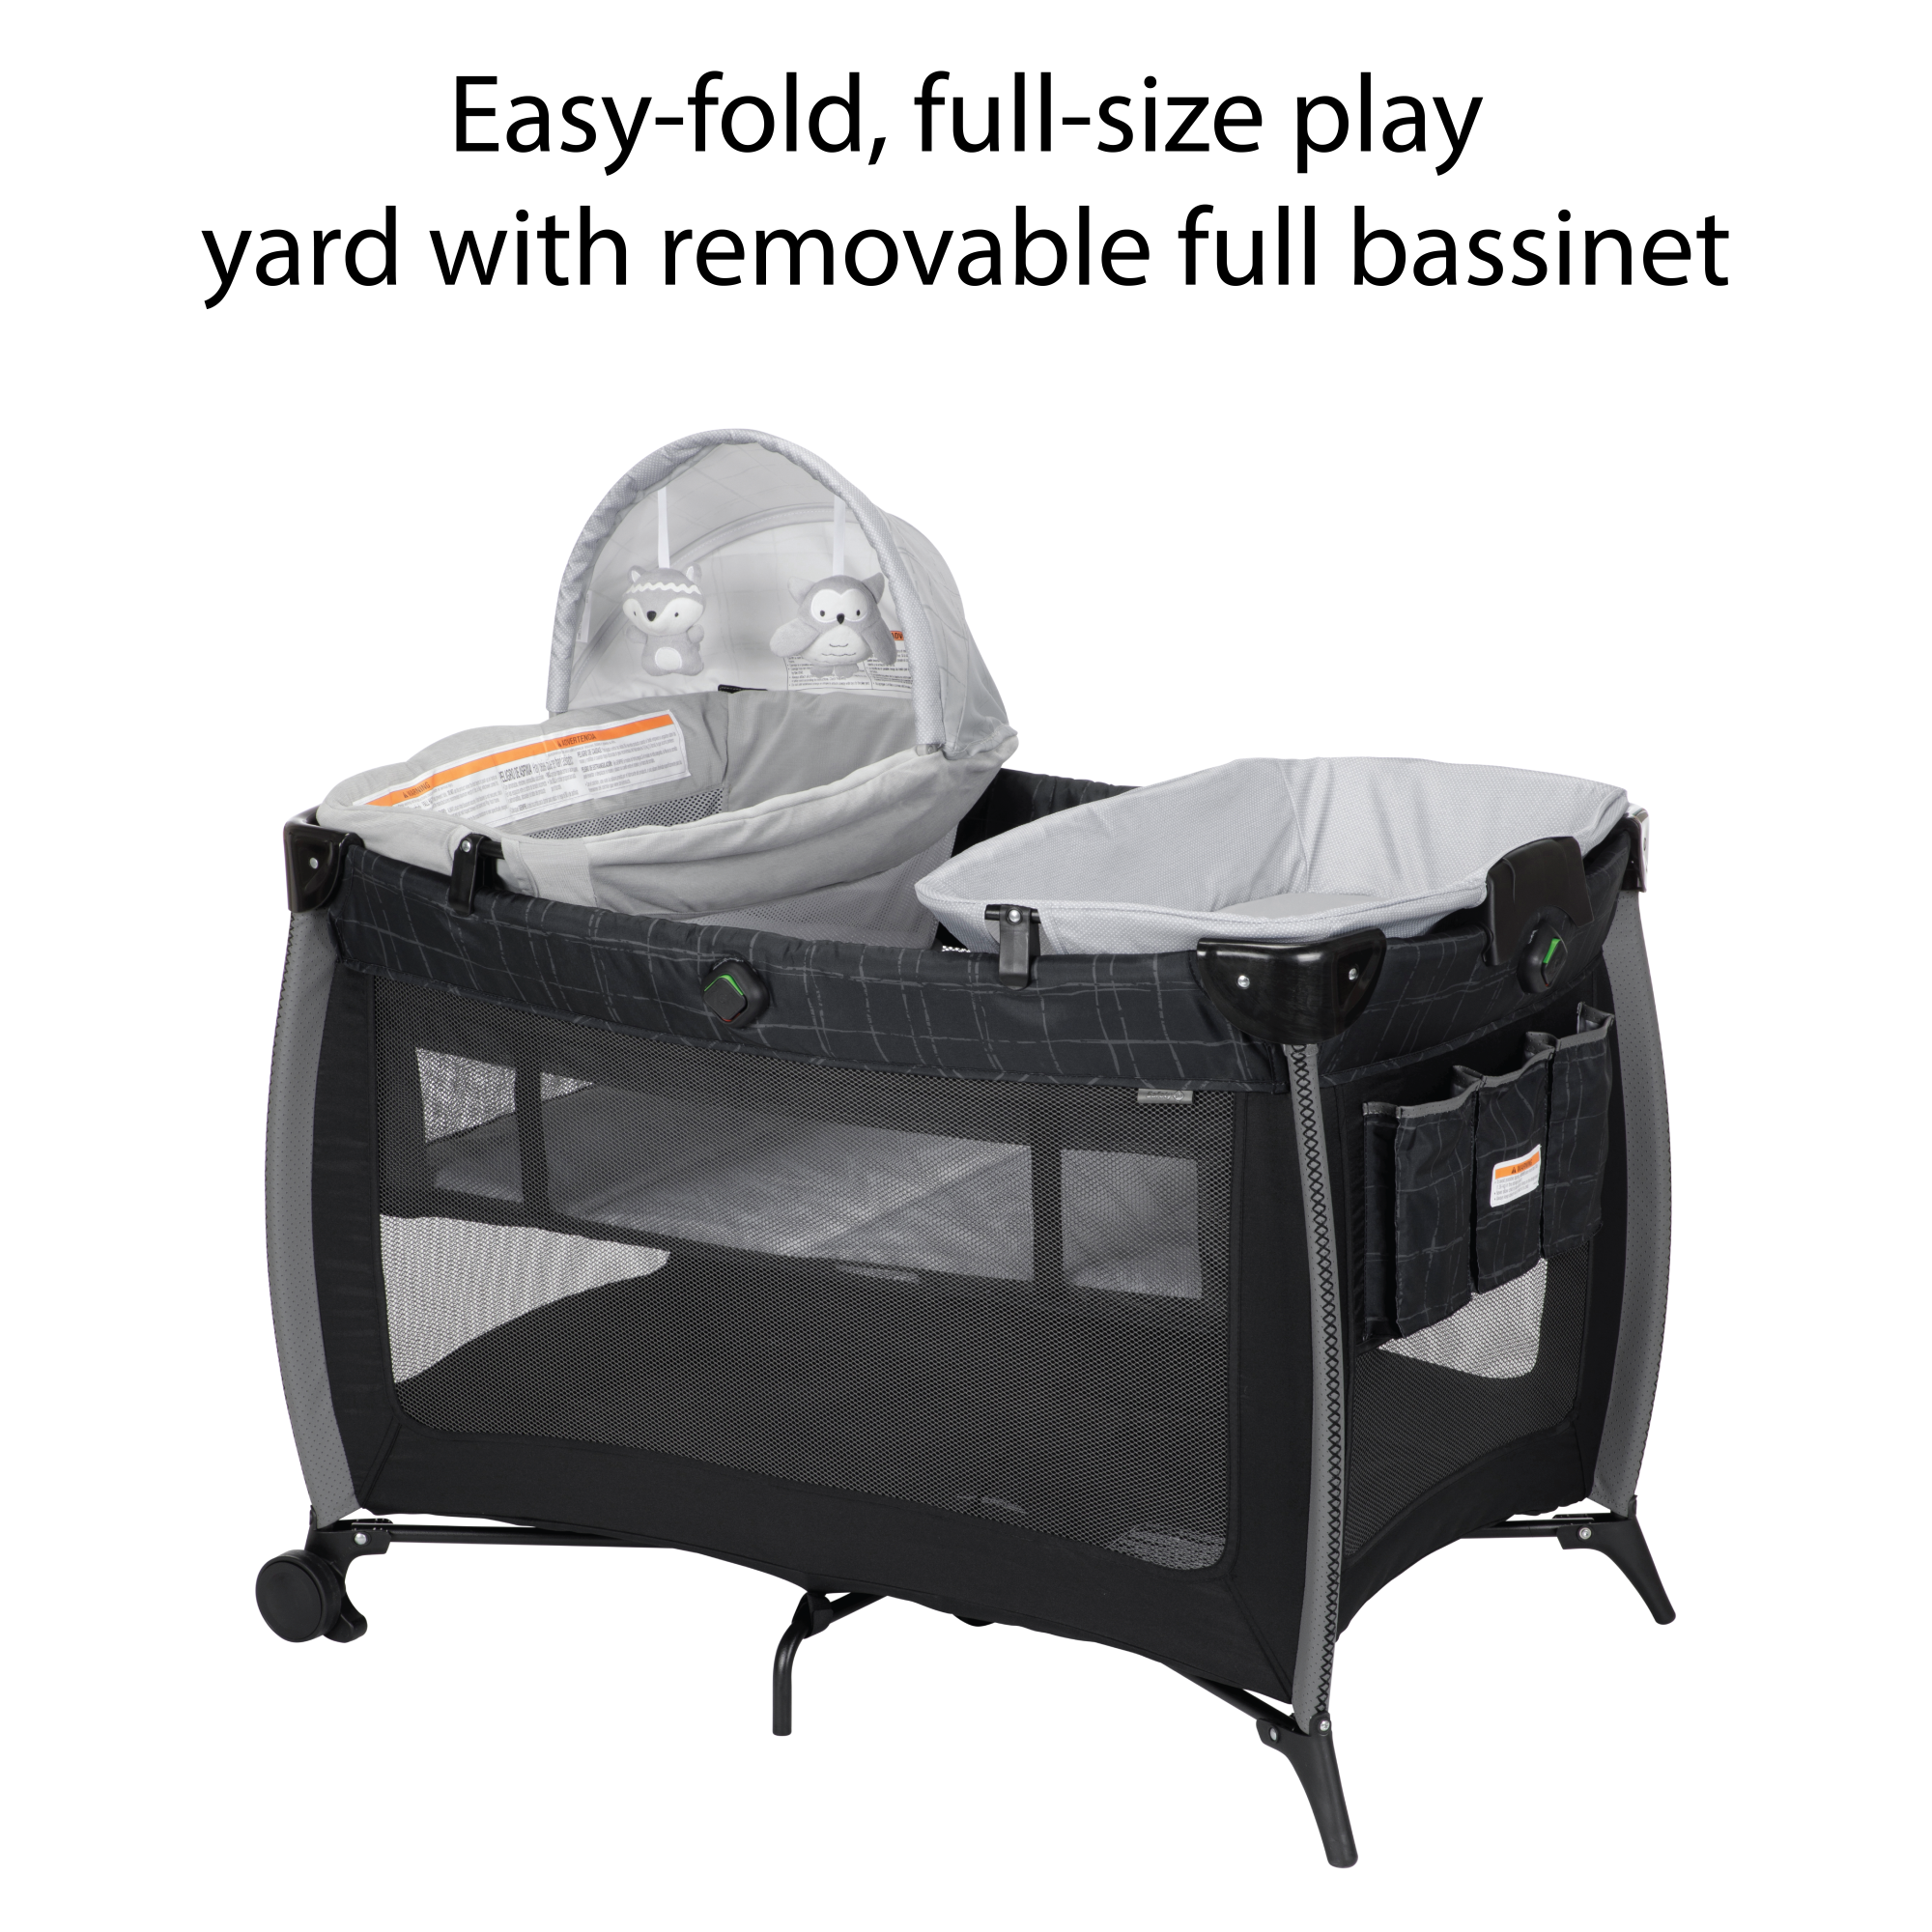 Play-and-Stay Play Yard - easy-fold, full-size play yard with removable full bassinet